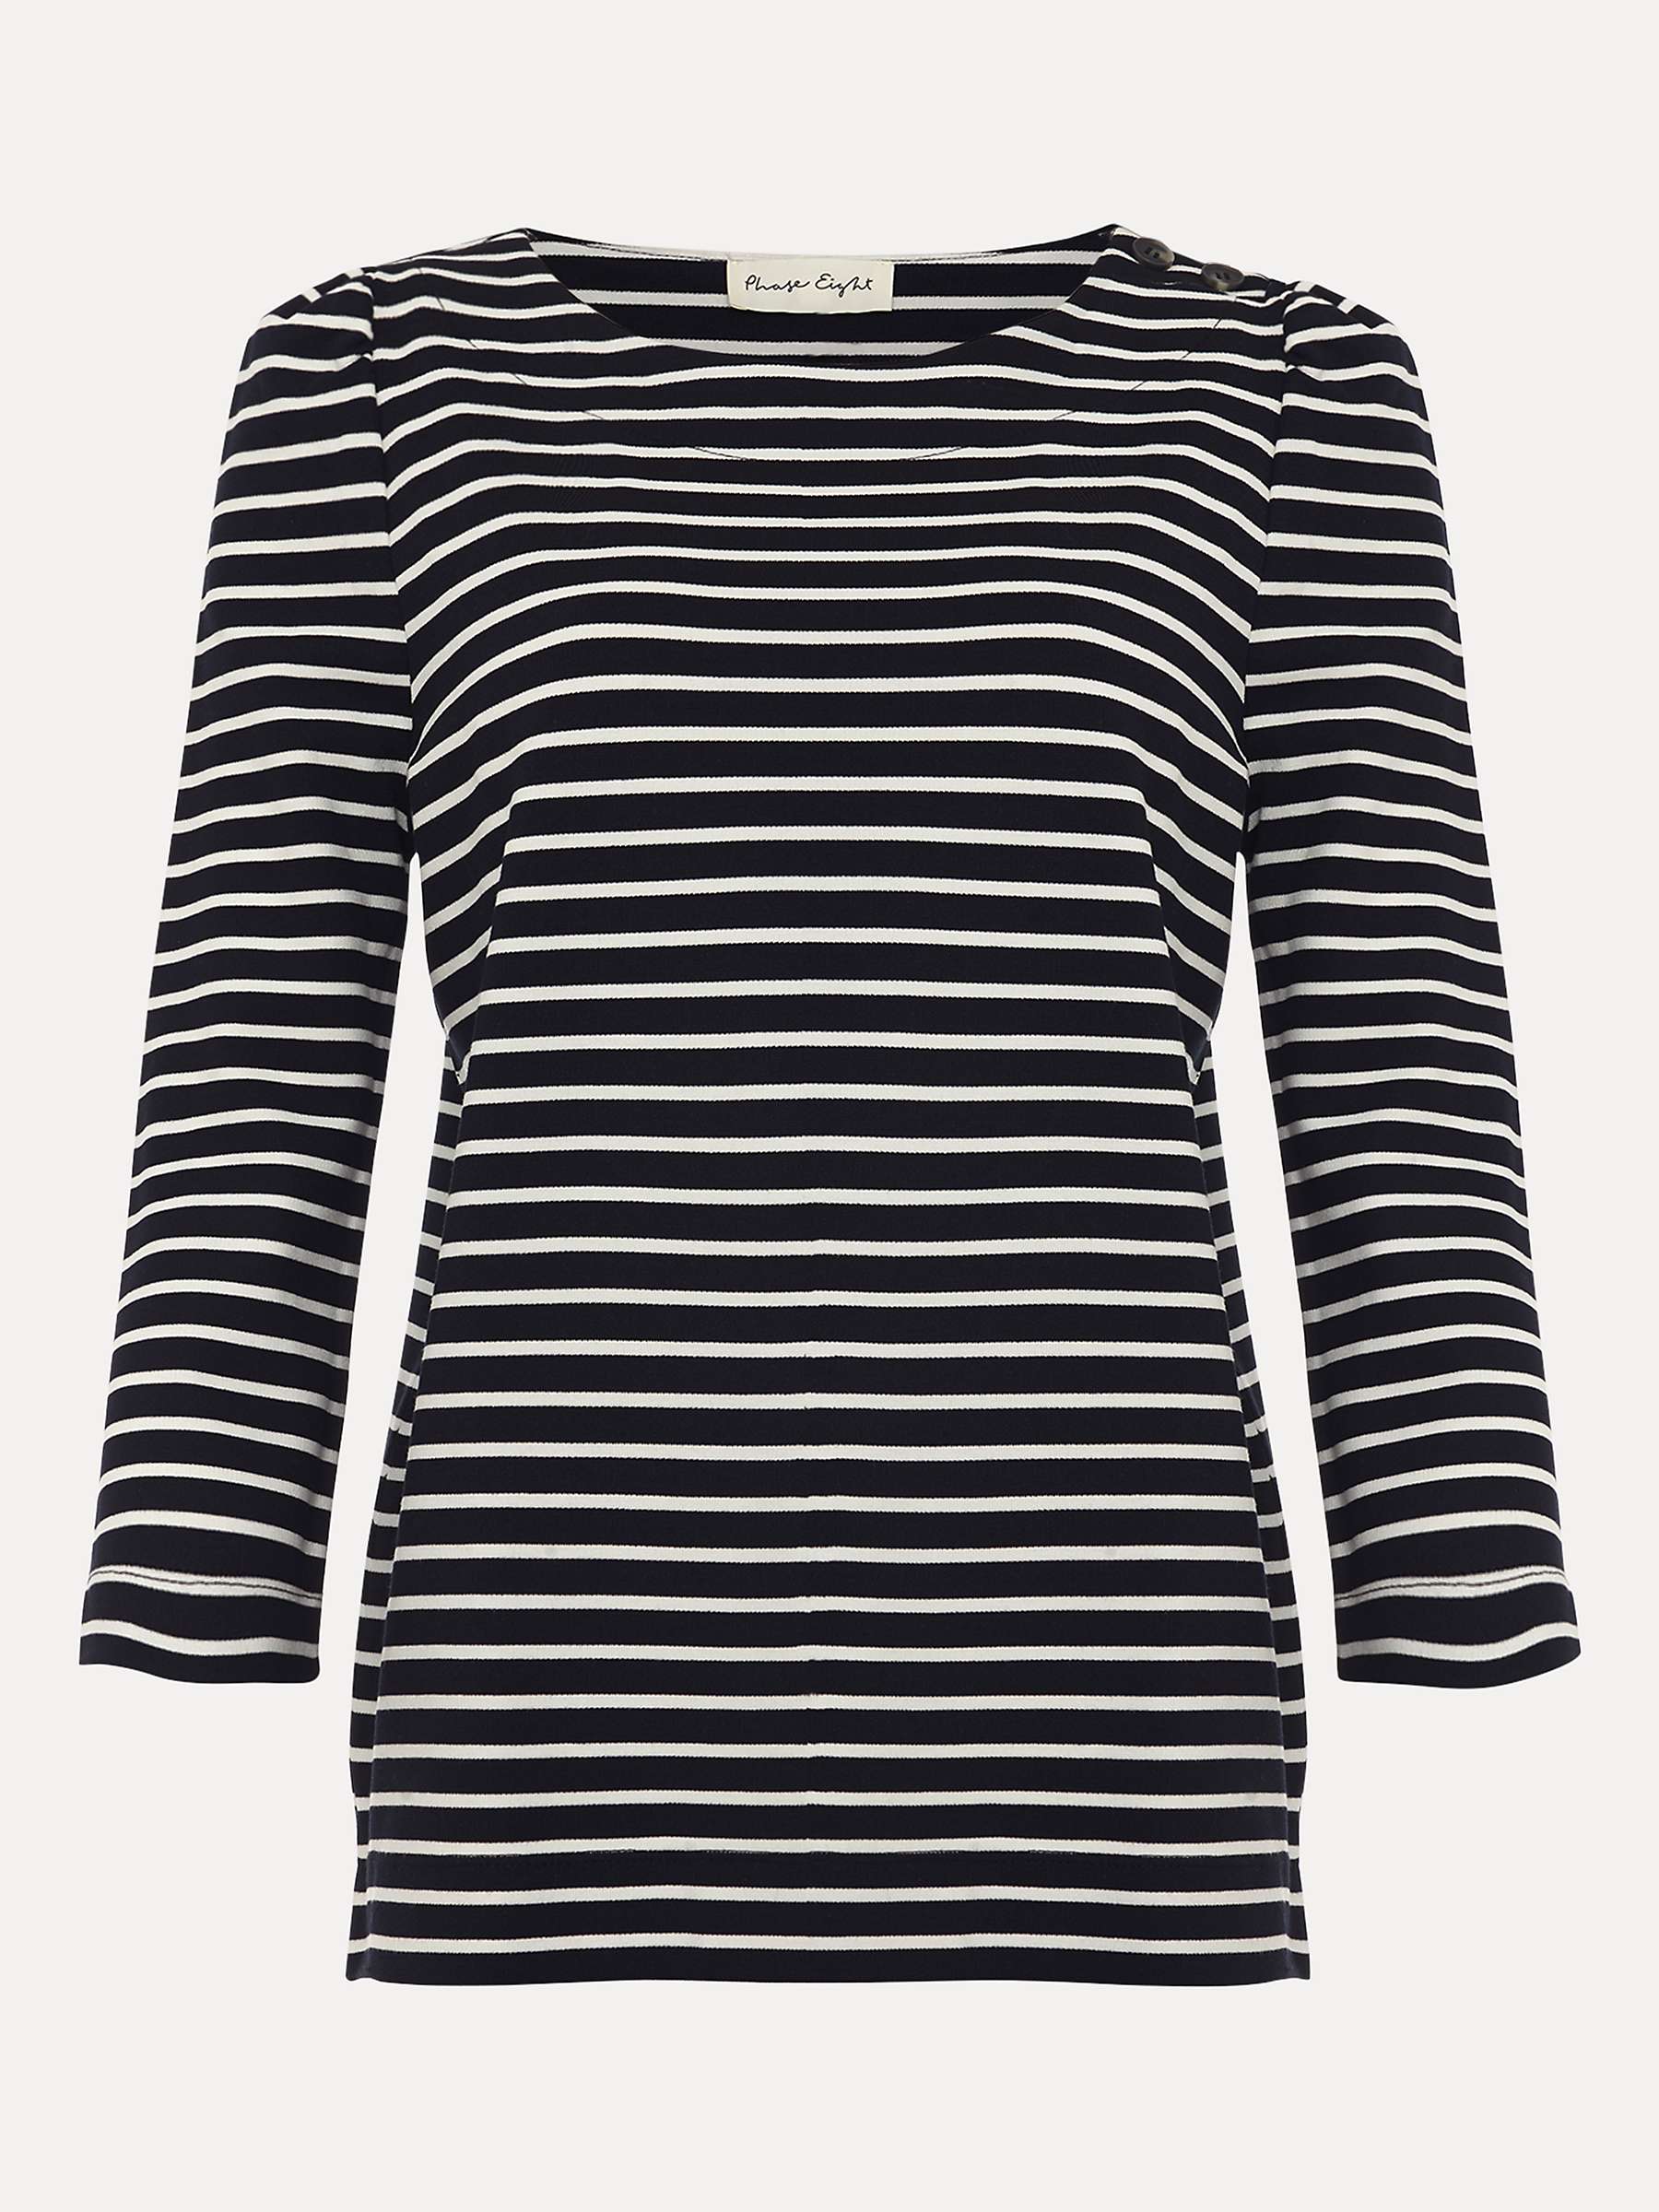 Buy Phase Eight Orabella Striped Puff Shoulder Top, Navy/White Online at johnlewis.com